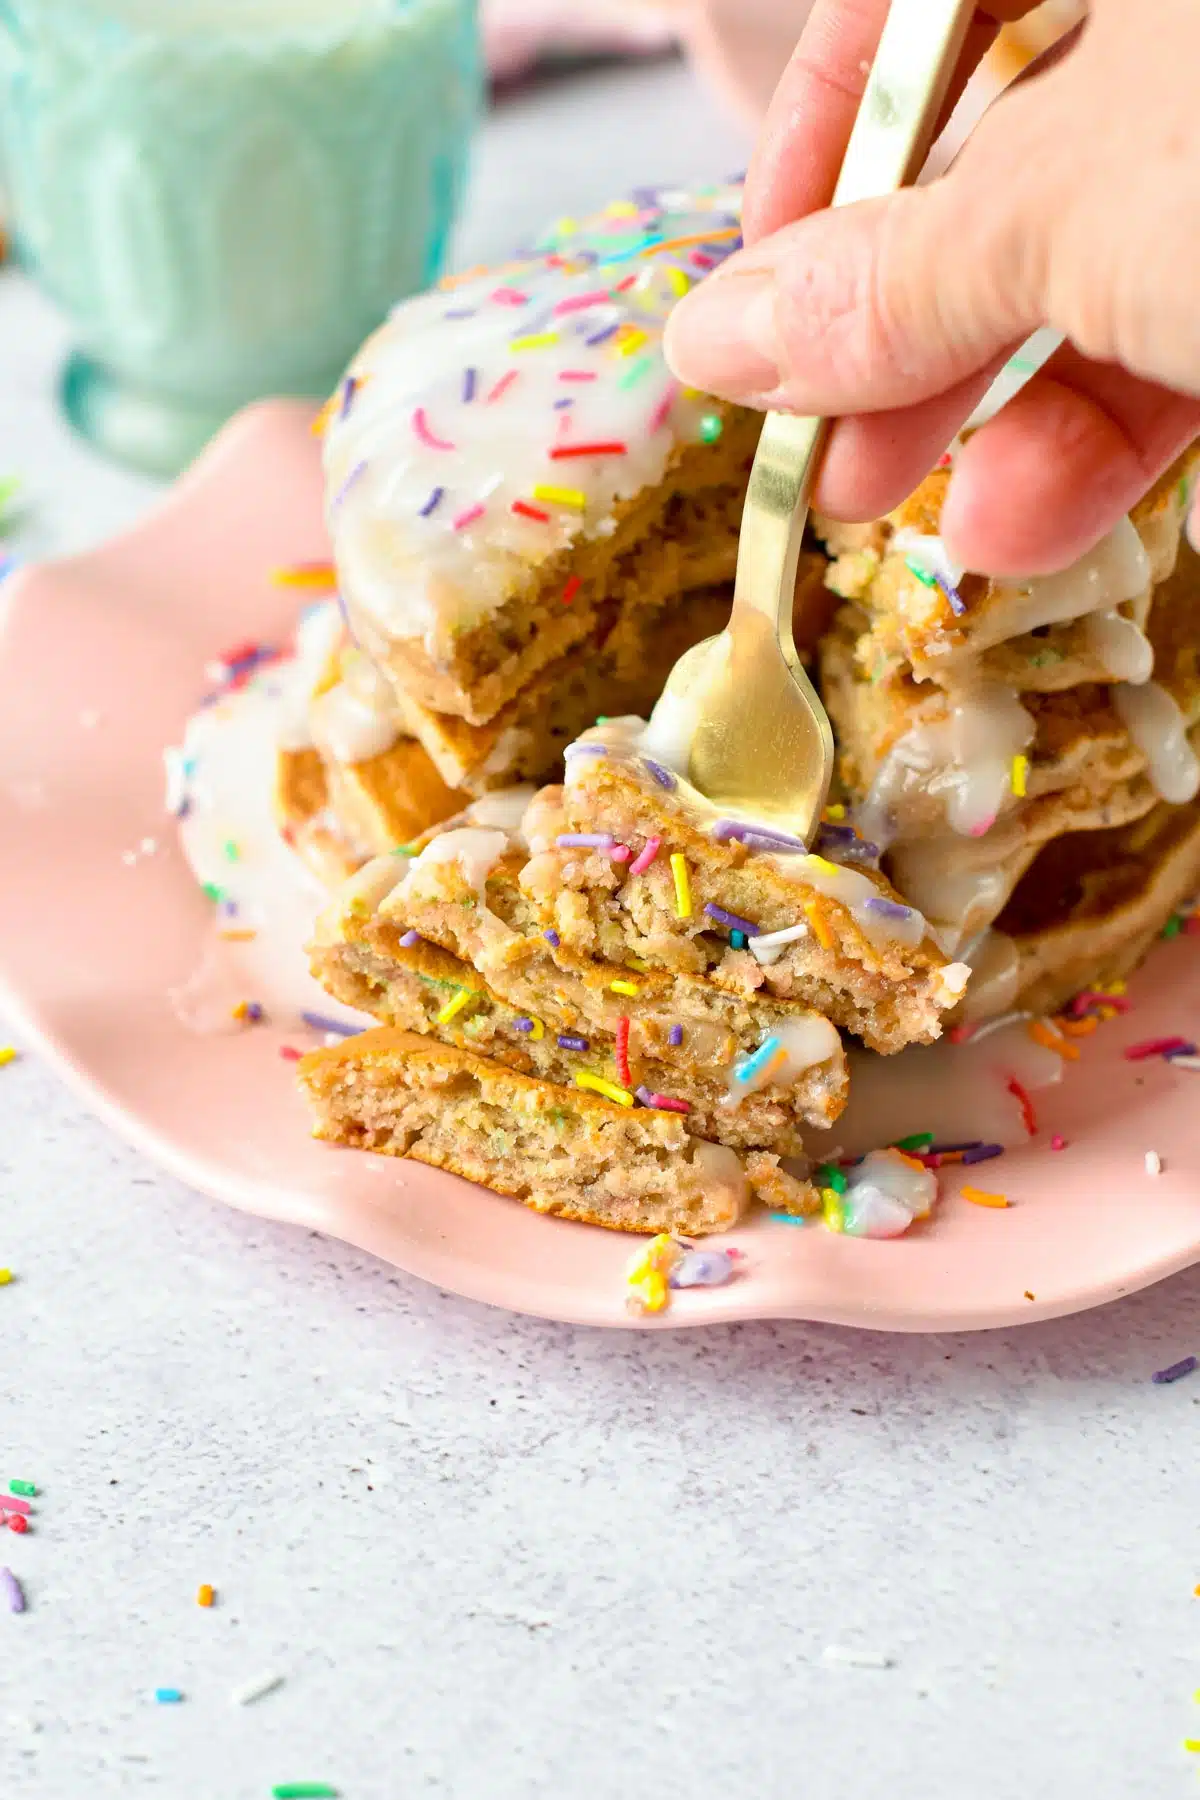  These funfetti pancakes are easy, fluffy pancakes filled with funfetti colors and perfect for birthday breakfast . Plus, they are easy to make in less than 20 minutes for a quick party breakfast.